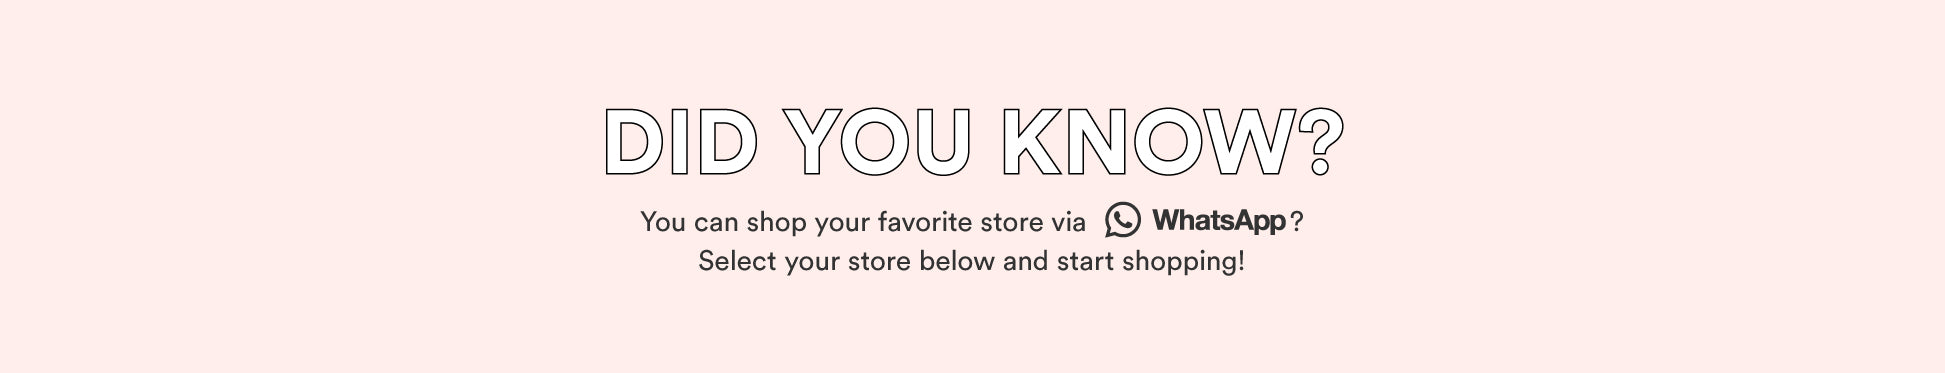 Did you know you can shop your favorite store via WhatsApp? Select your store below and start shopping.